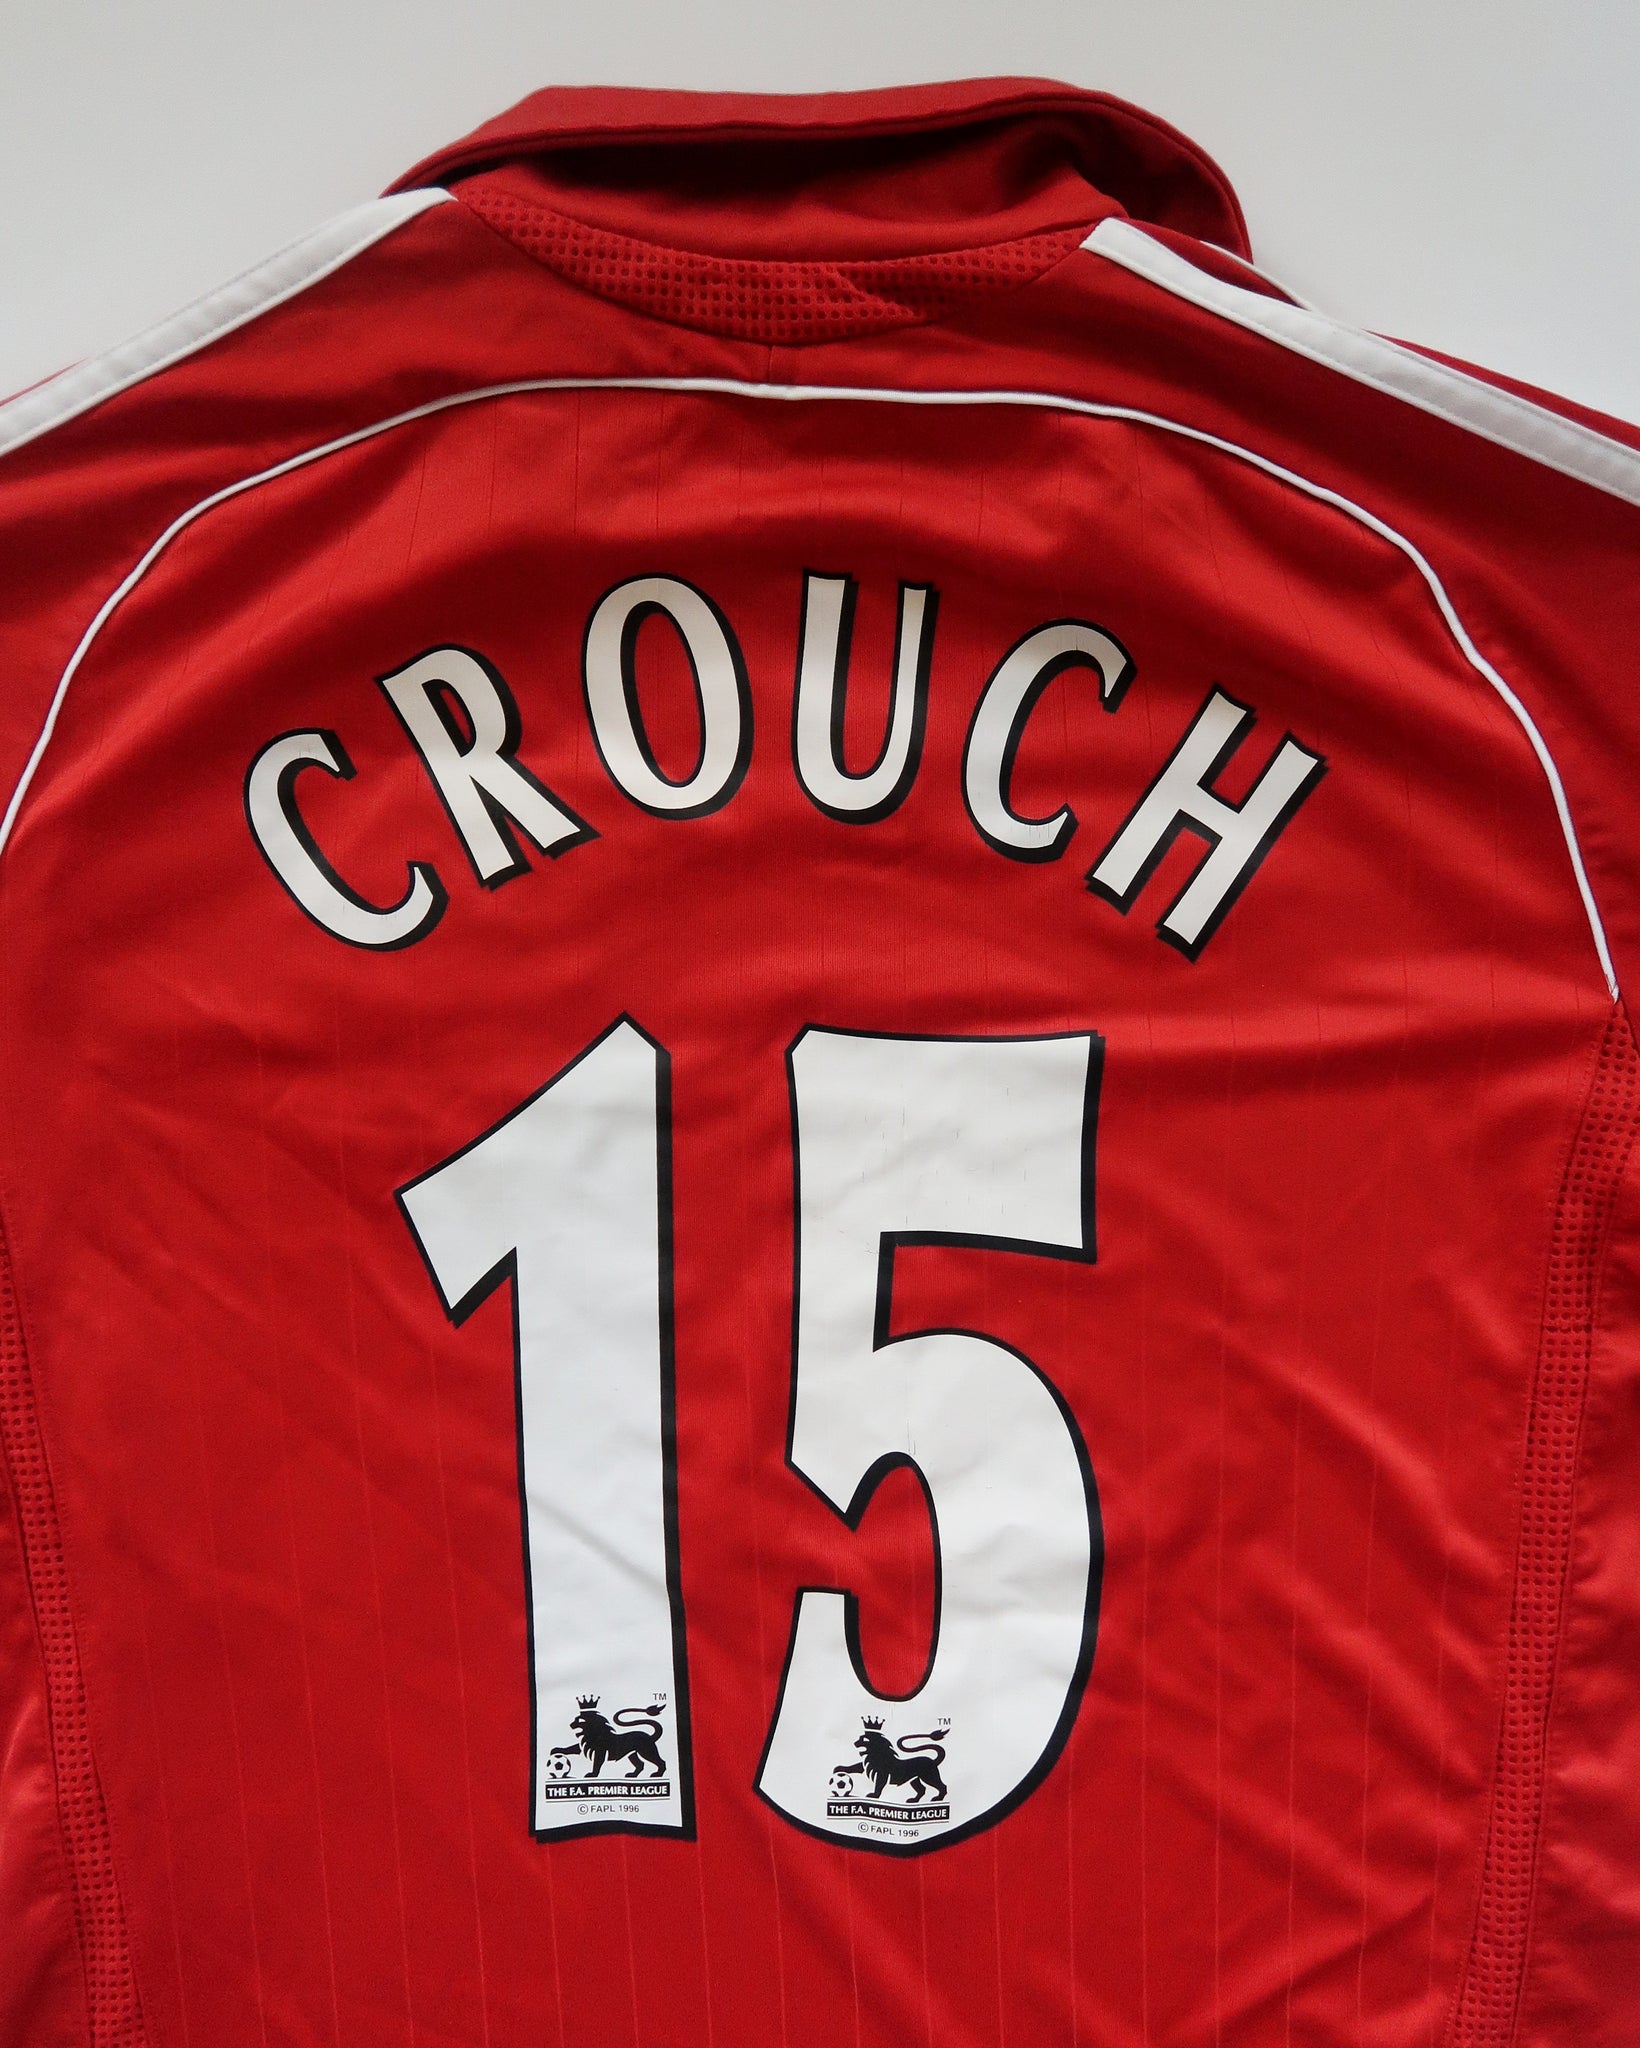 peter crouch liverpool jersey